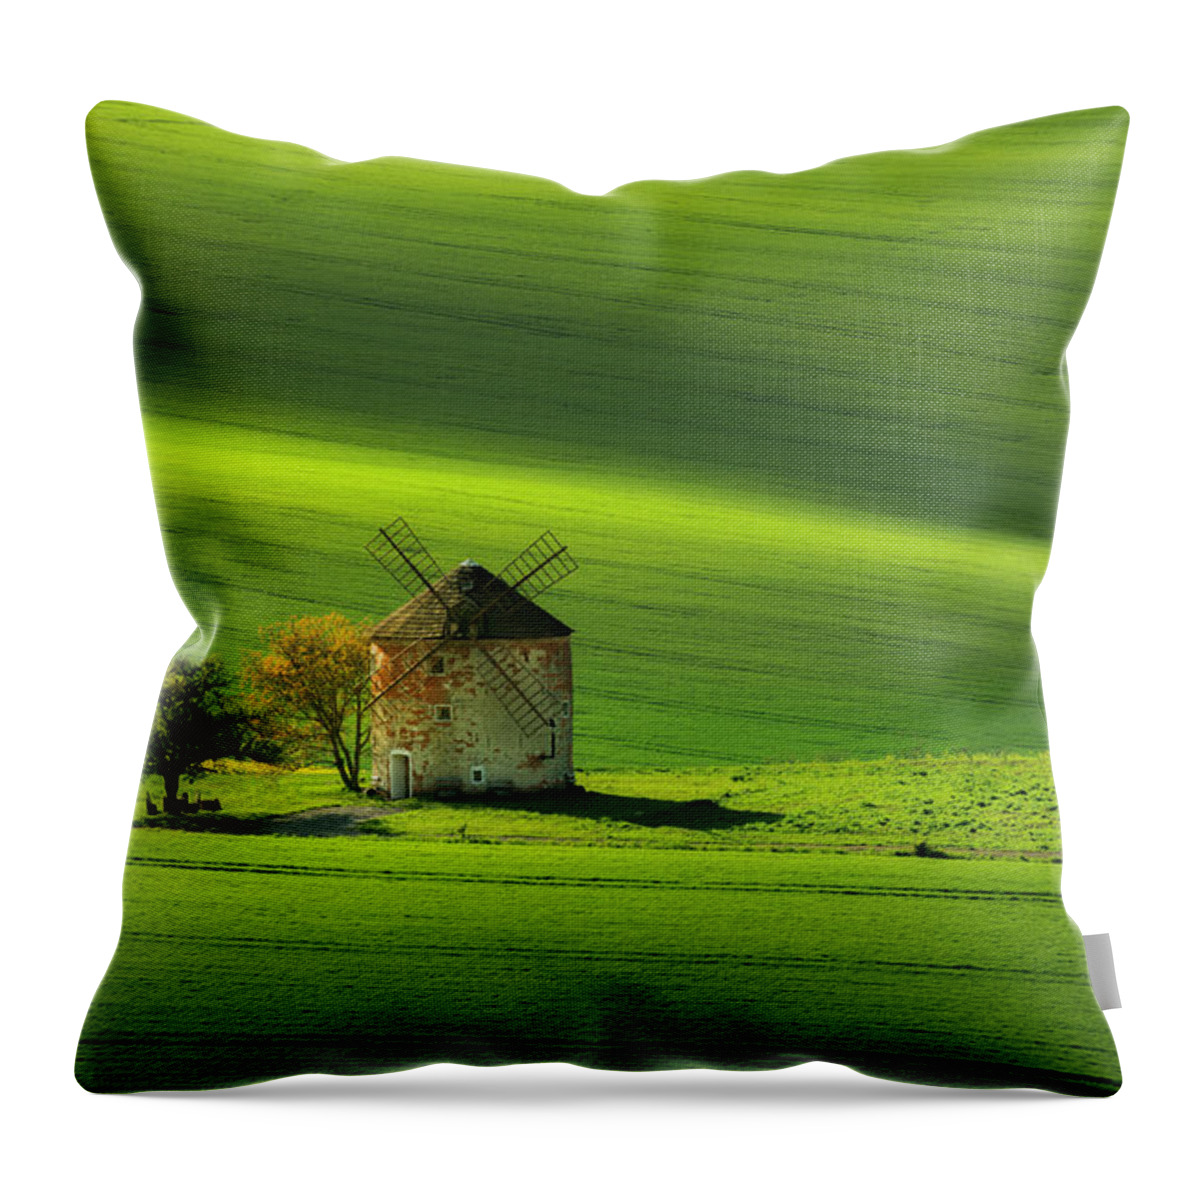 Europe Throw Pillow featuring the photograph Moravian Holland III by Piotr Skrzypiec